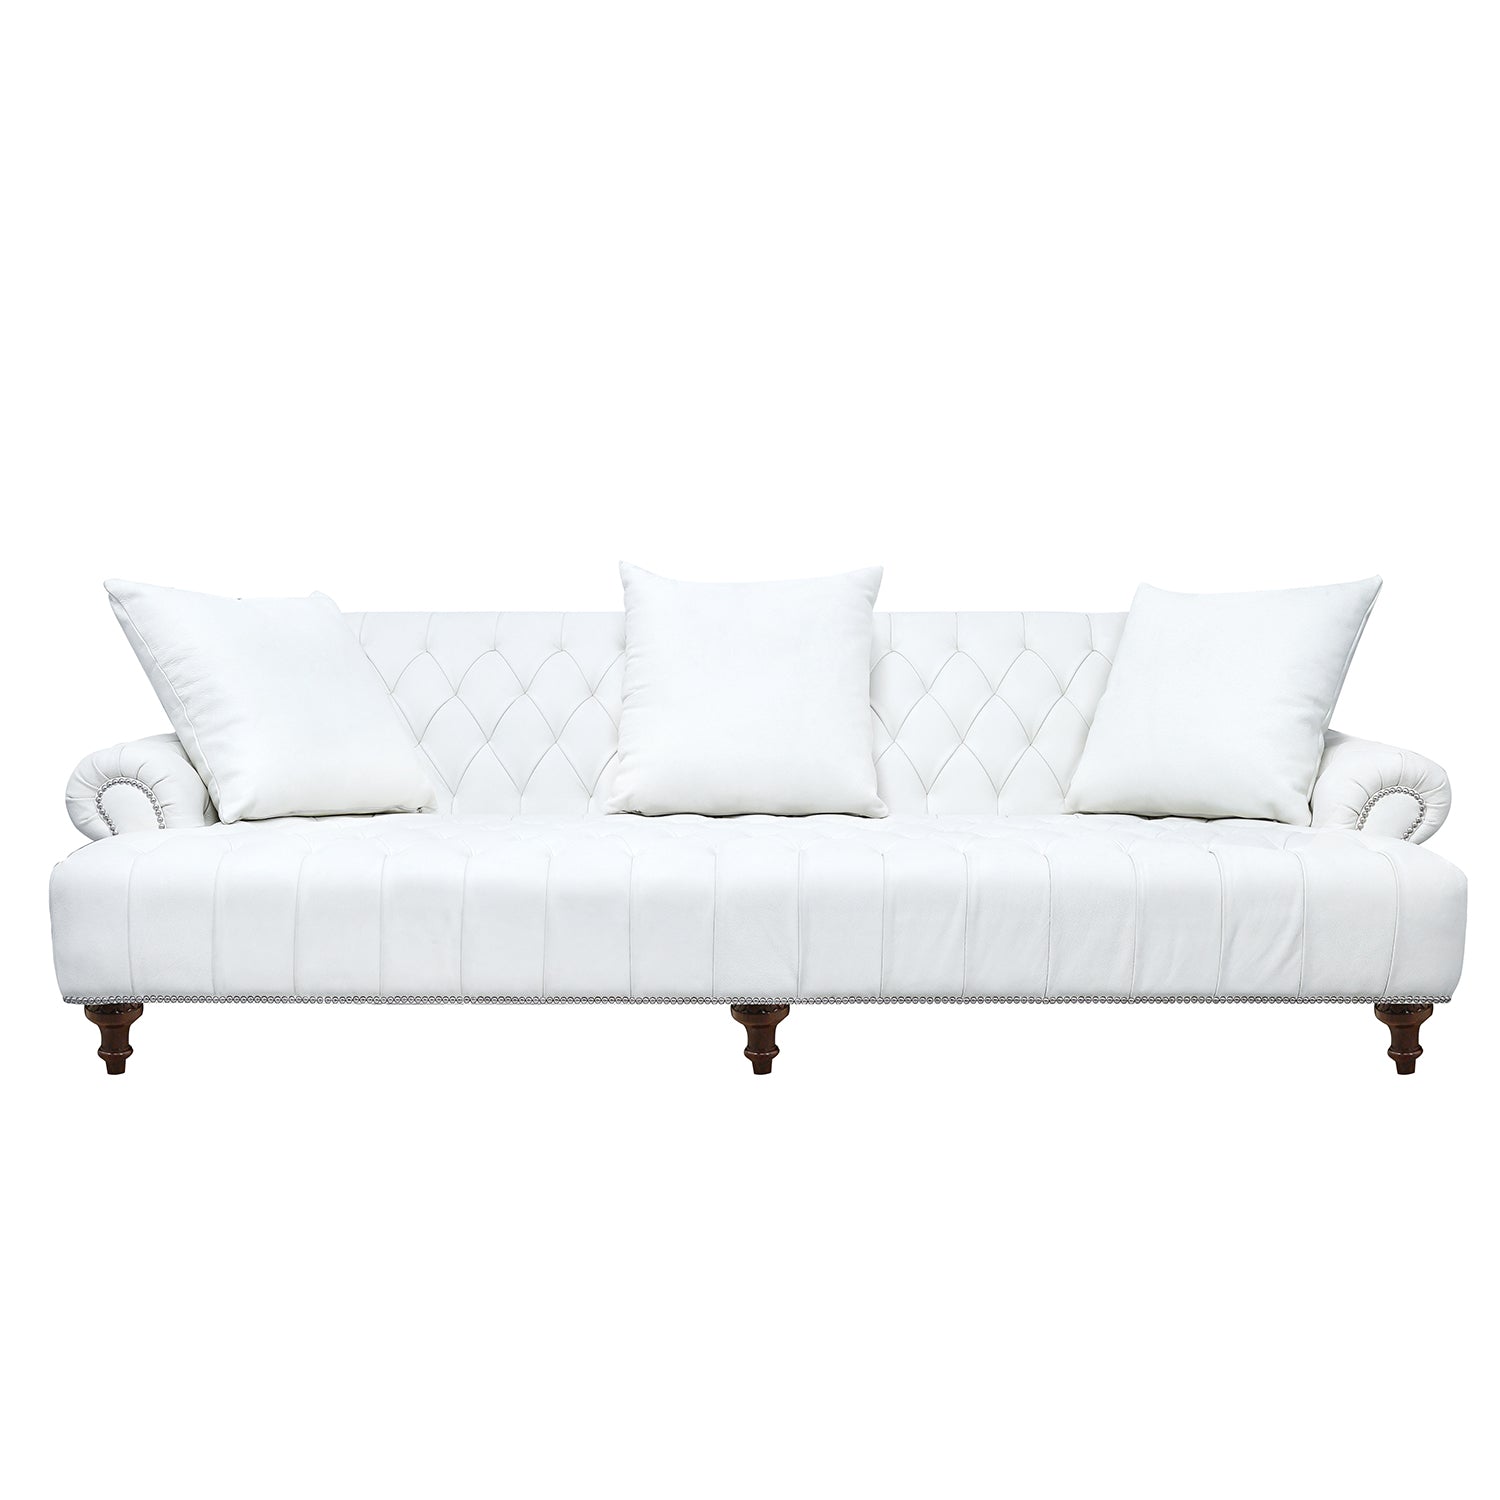 Henry Lear Leather Sofa Pearl Front Pillows